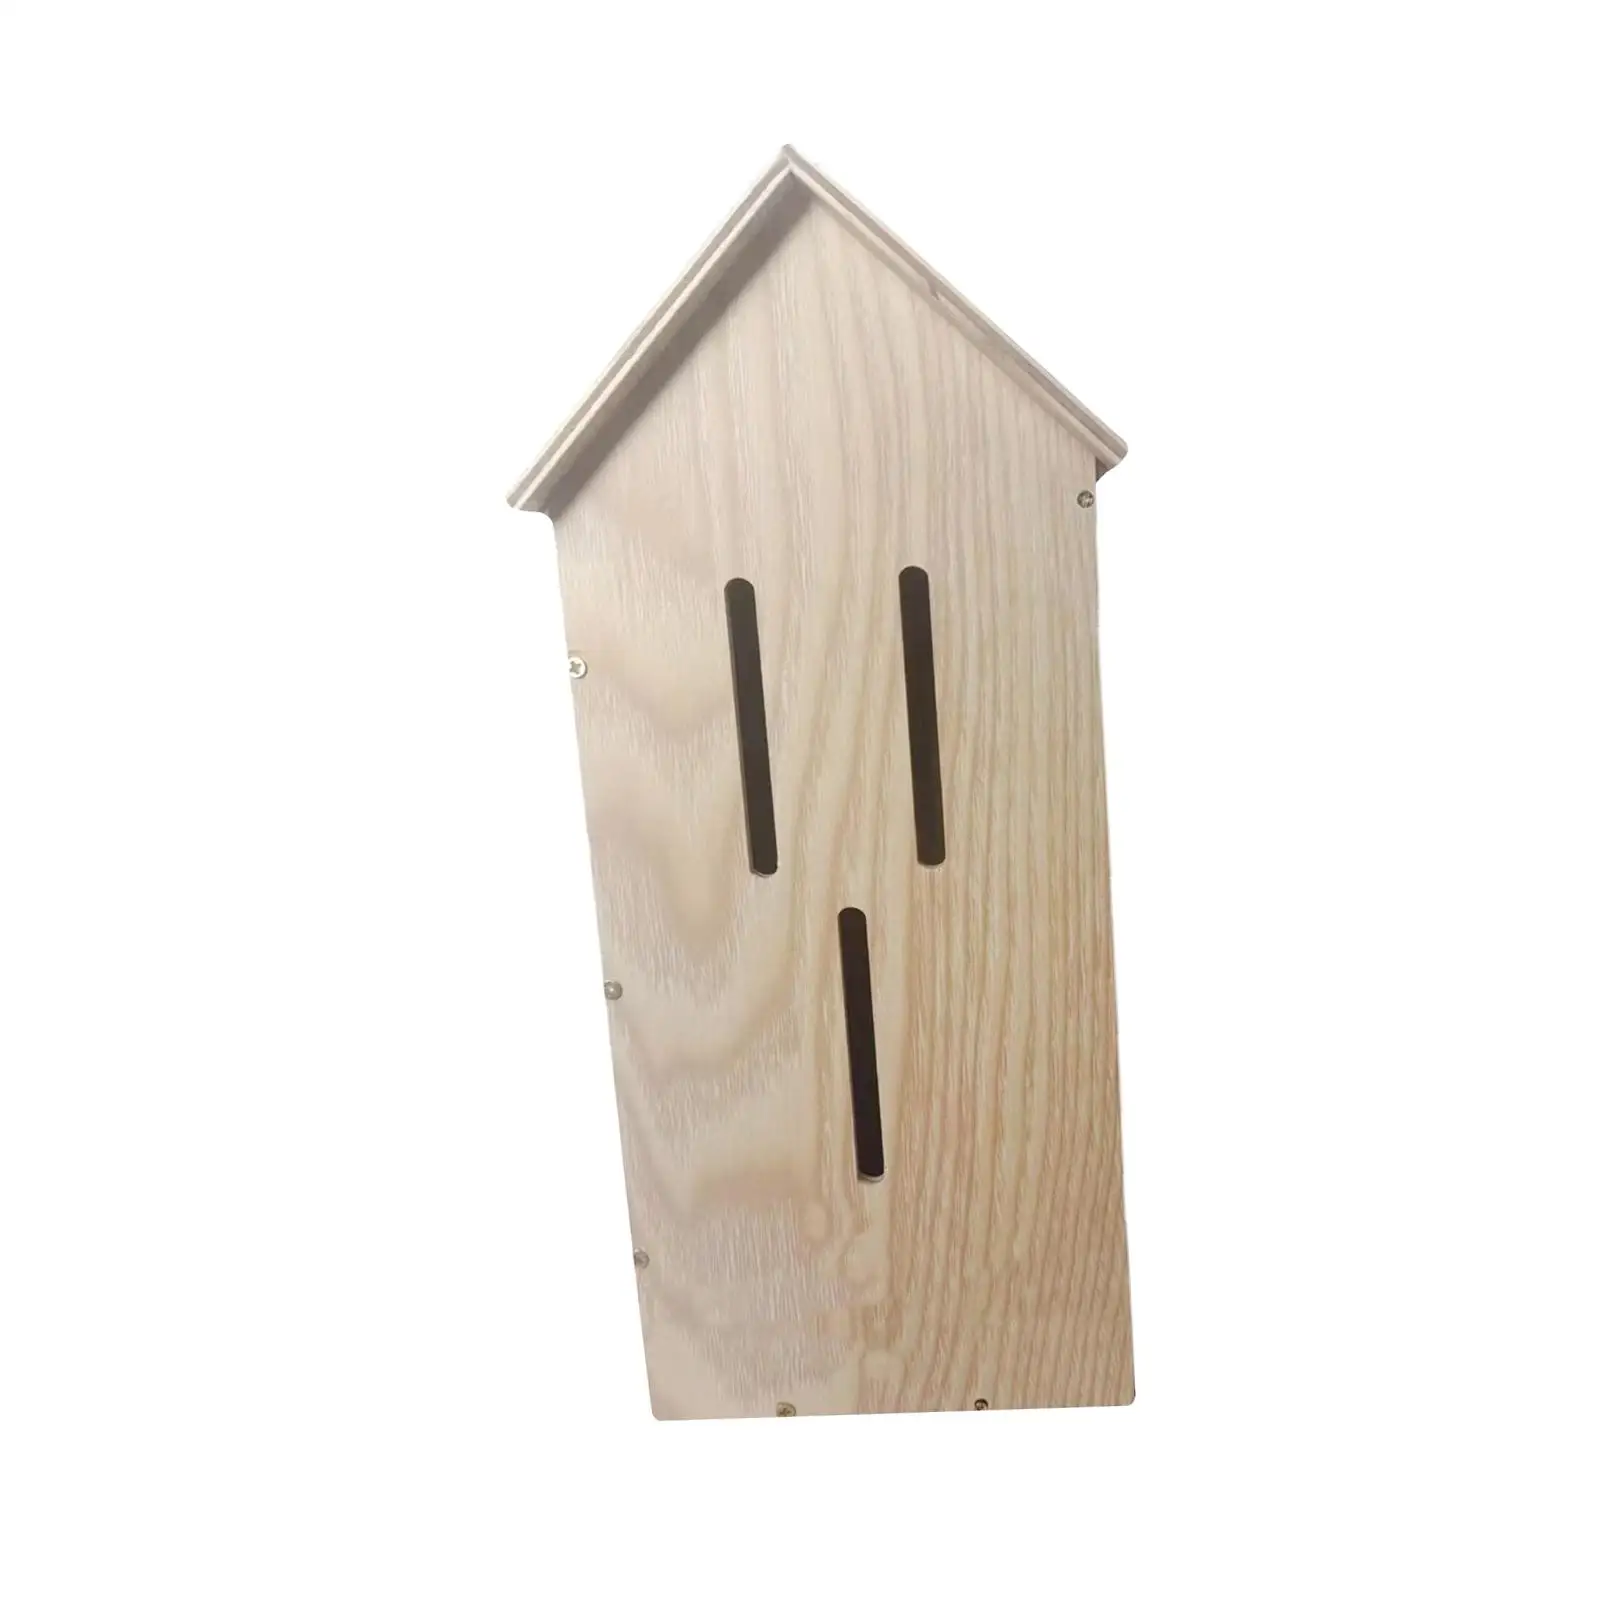 Butterfly Habitat Supplies Tree Trunk Protector Guard Wooden Butterfly House for Hotel